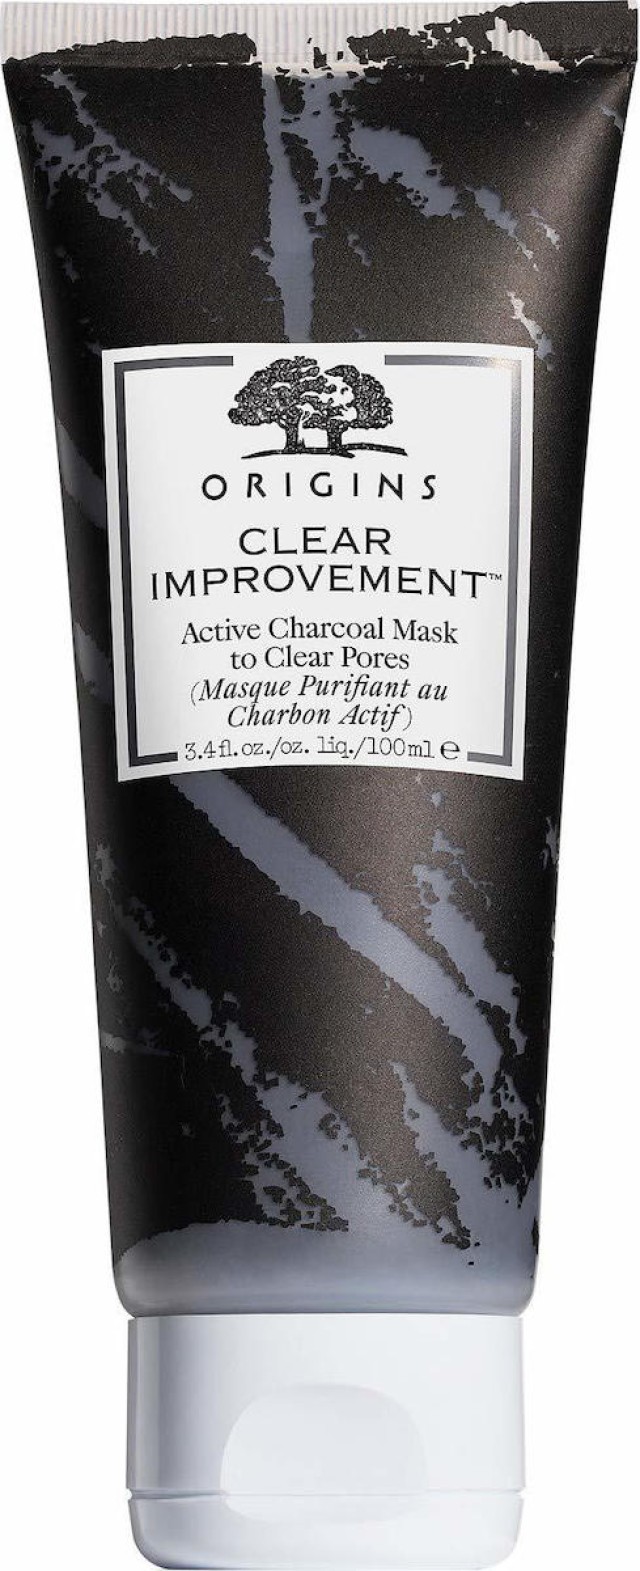 Origins Clear Improvement Active Charcoal Mask to Clear Pores Μάσκα με Ενεργό Άνθρακα για Βαθύ Καθαρισμό των Πόρων 75ml